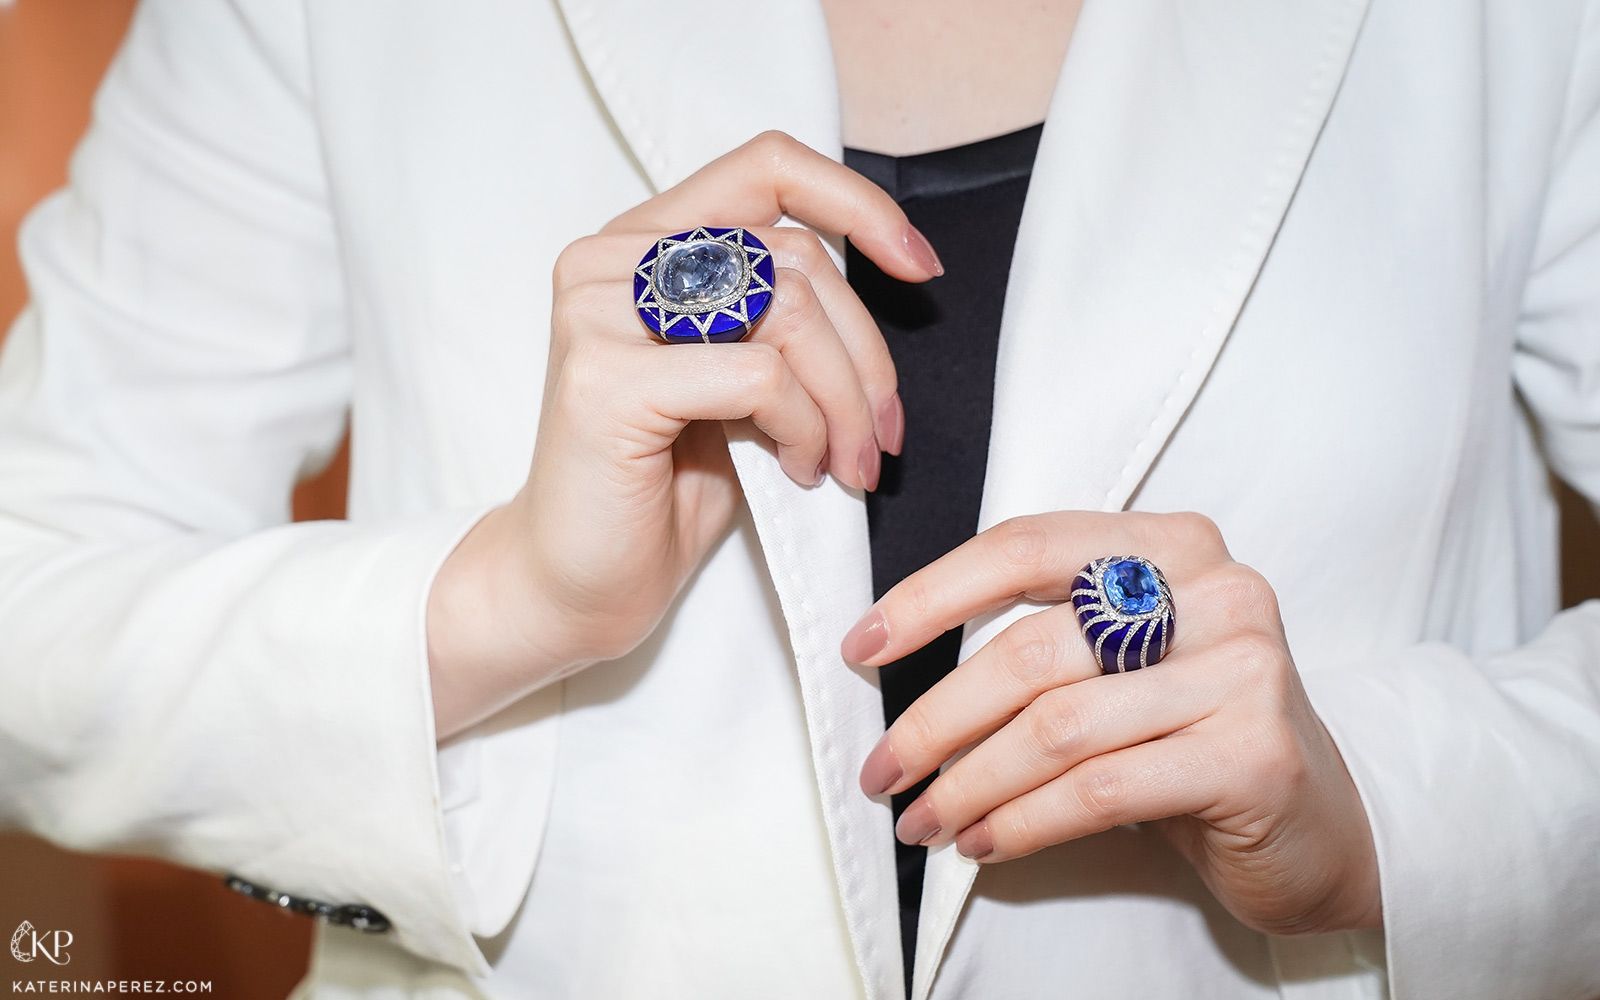 Gemstone cocktail rings by J-Jewels, photographed at Vicenzaoro 2021